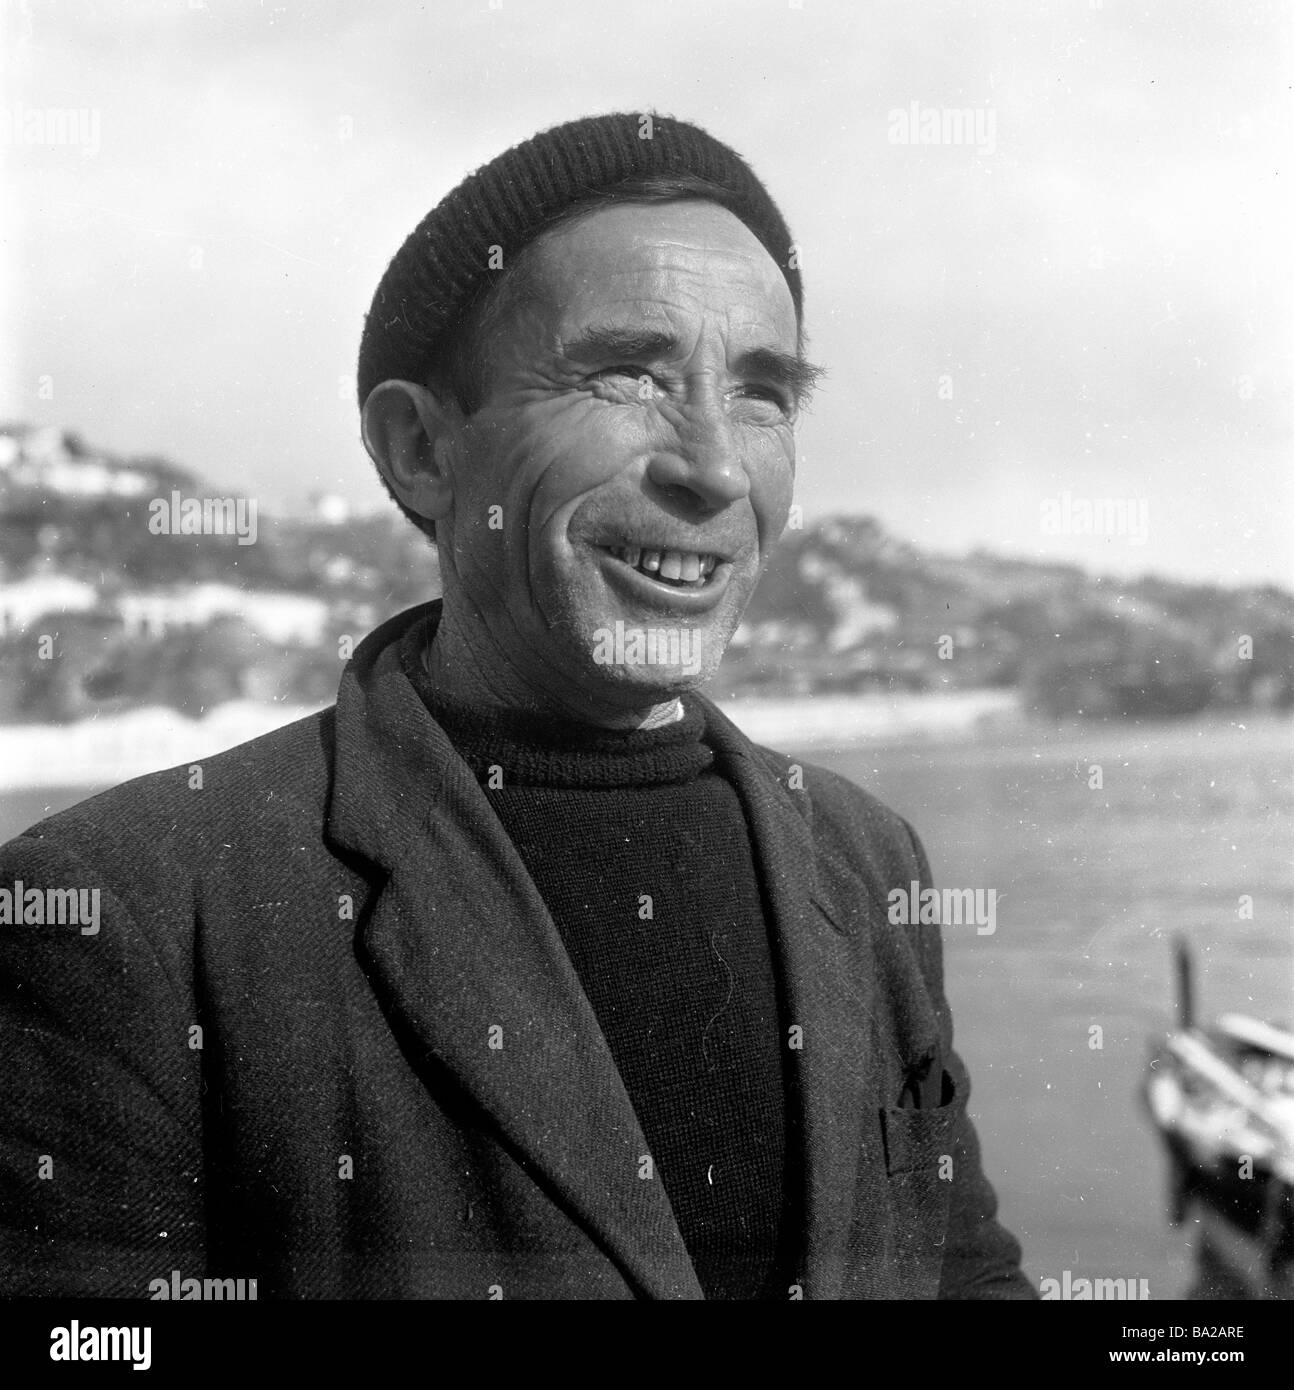 1950s, historical, portrait by J Allan Cash of a local fisherman with beret at the port of Villefranche-sur-Mer, on the French Riviera, France. Stock Photo